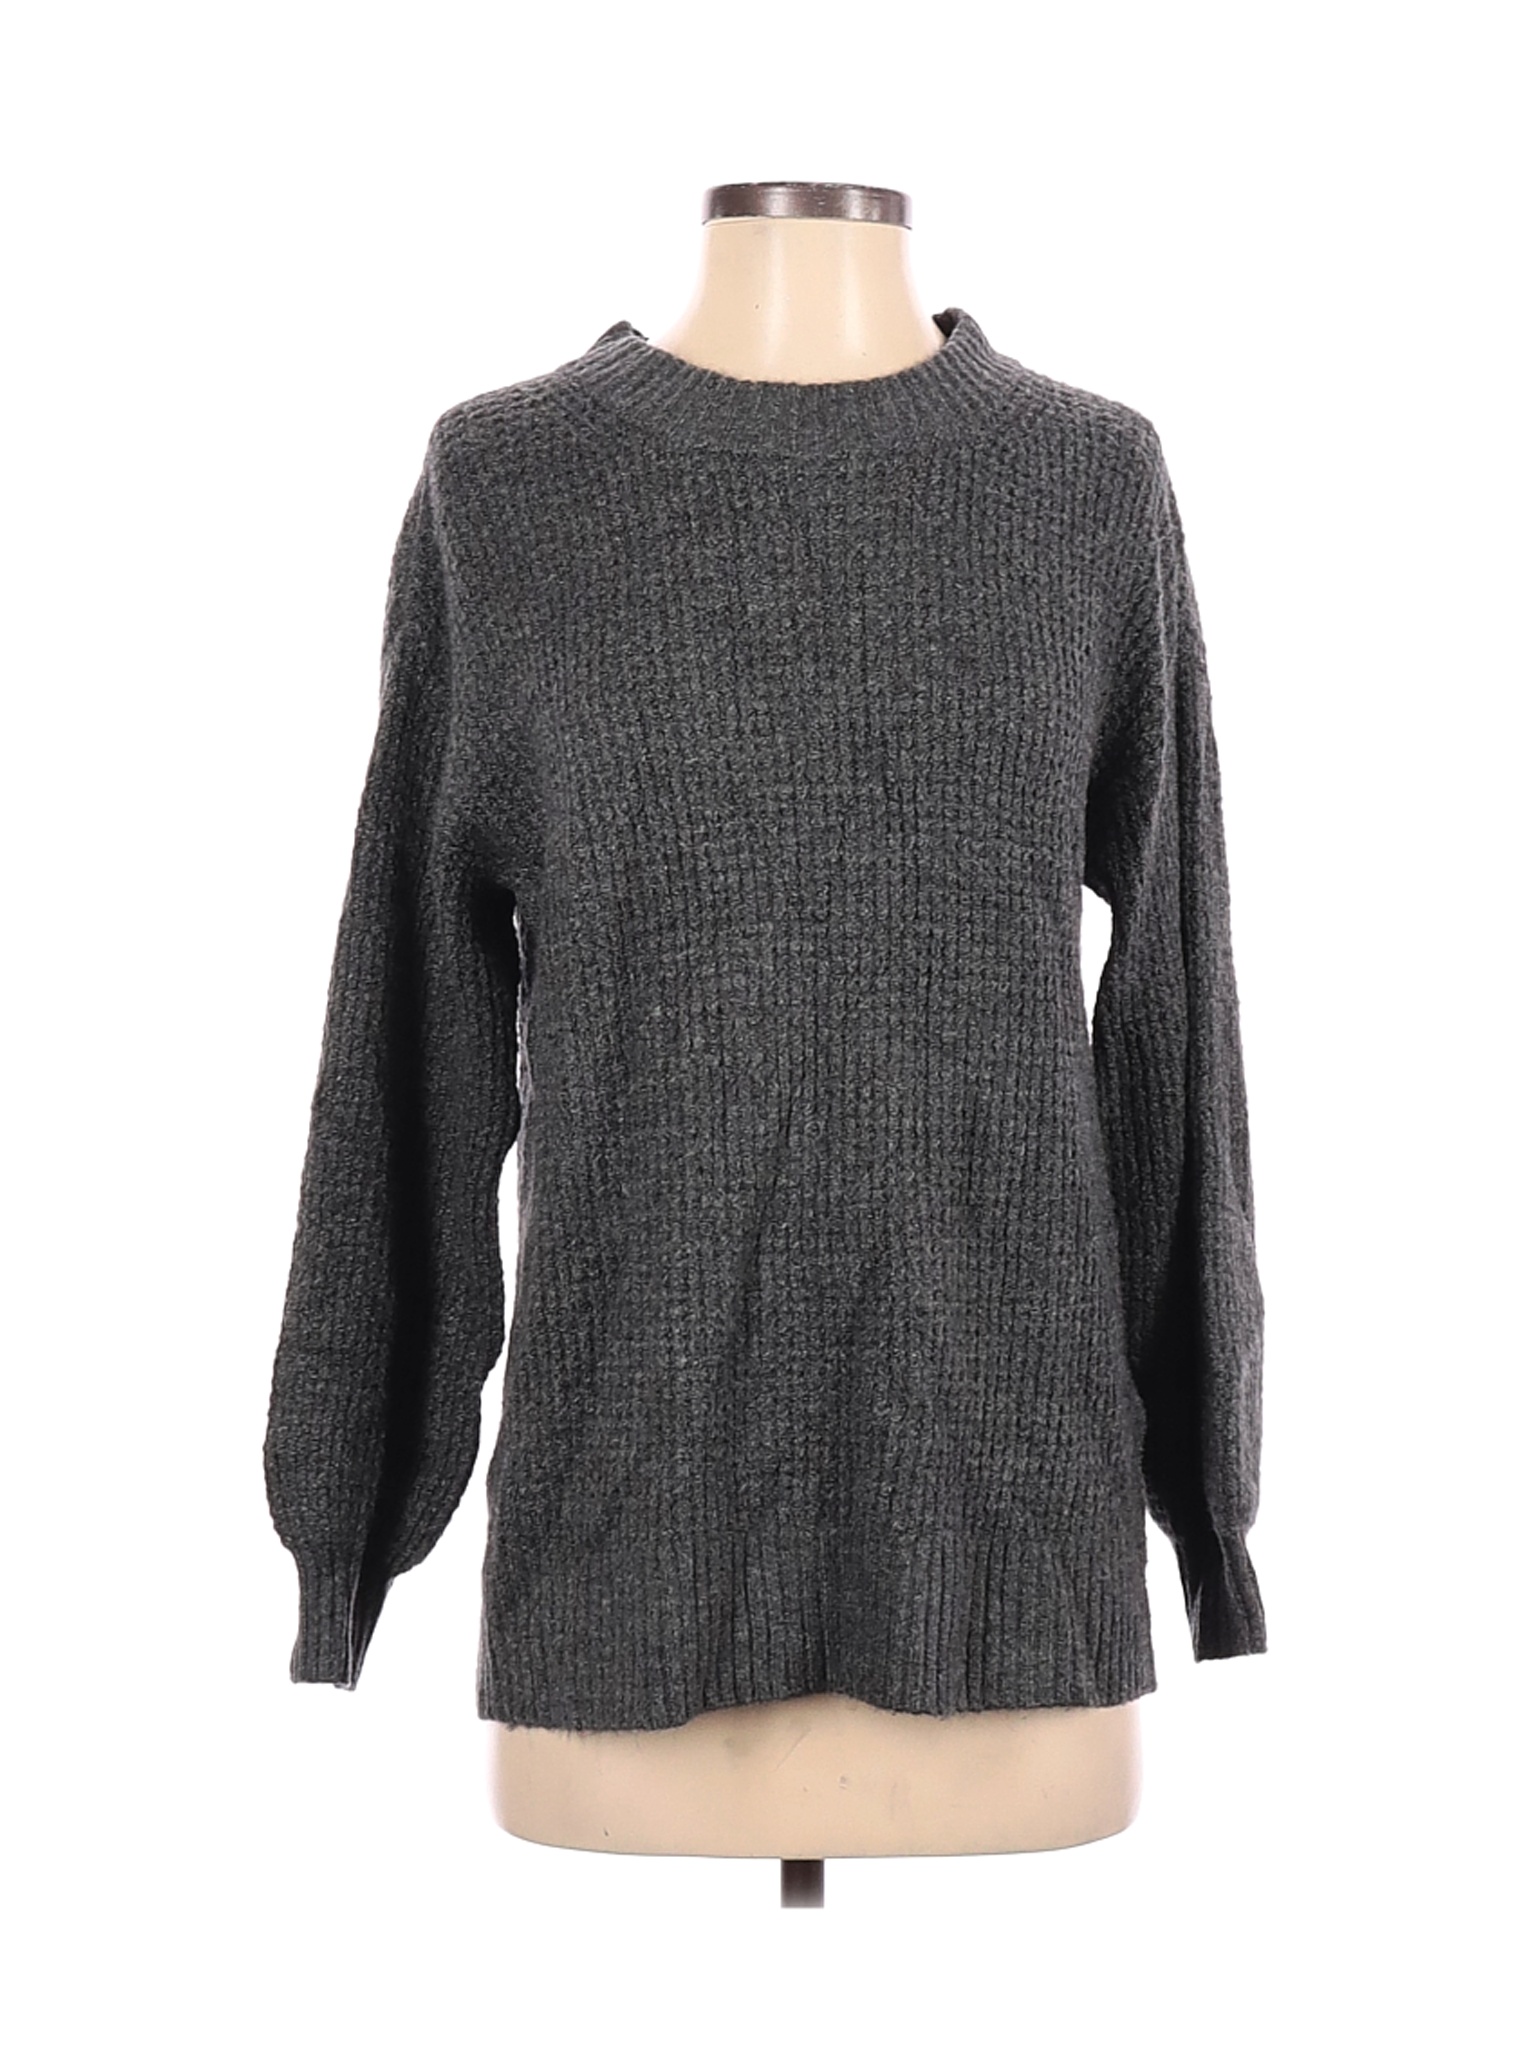 NWT American Eagle Outfitters Women Gray Pullover Sweater XS | eBay